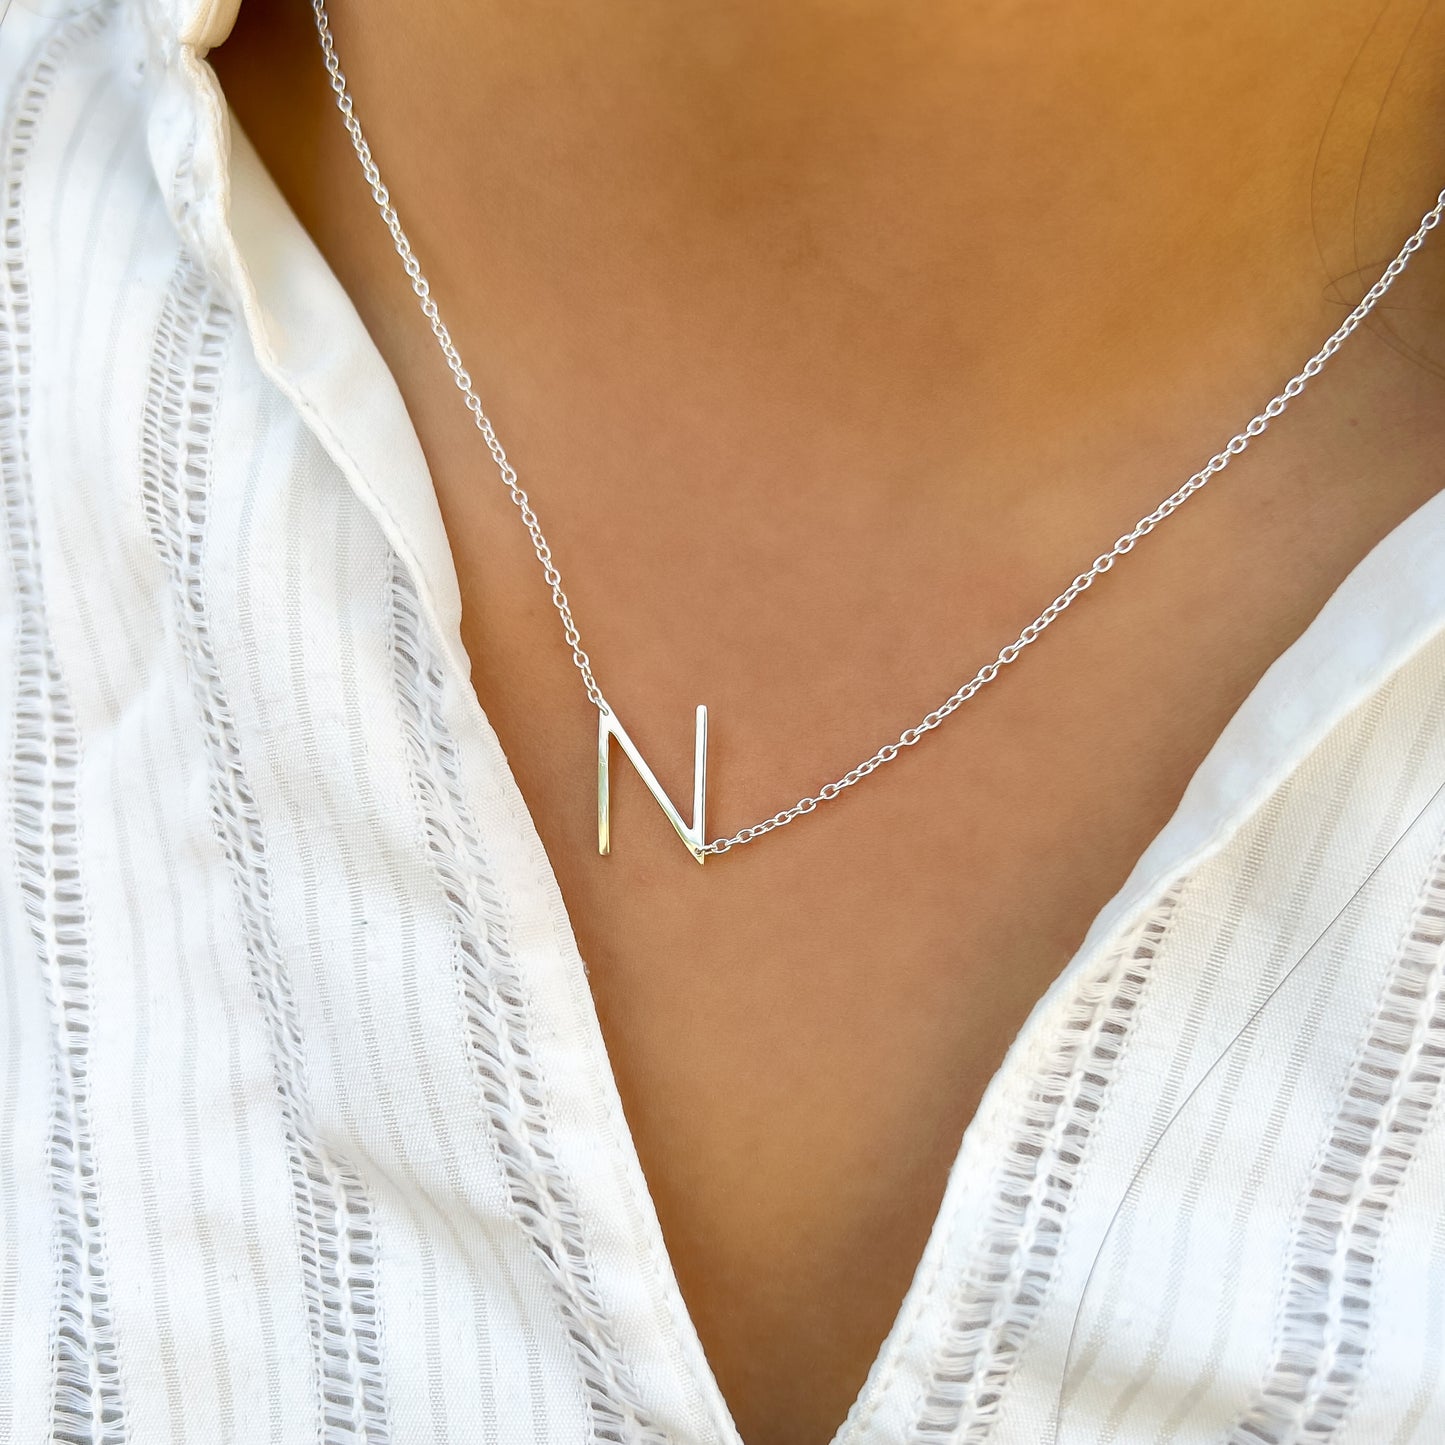 Silver Letter N Initial Necklace - Alexandra Marks Jewelry